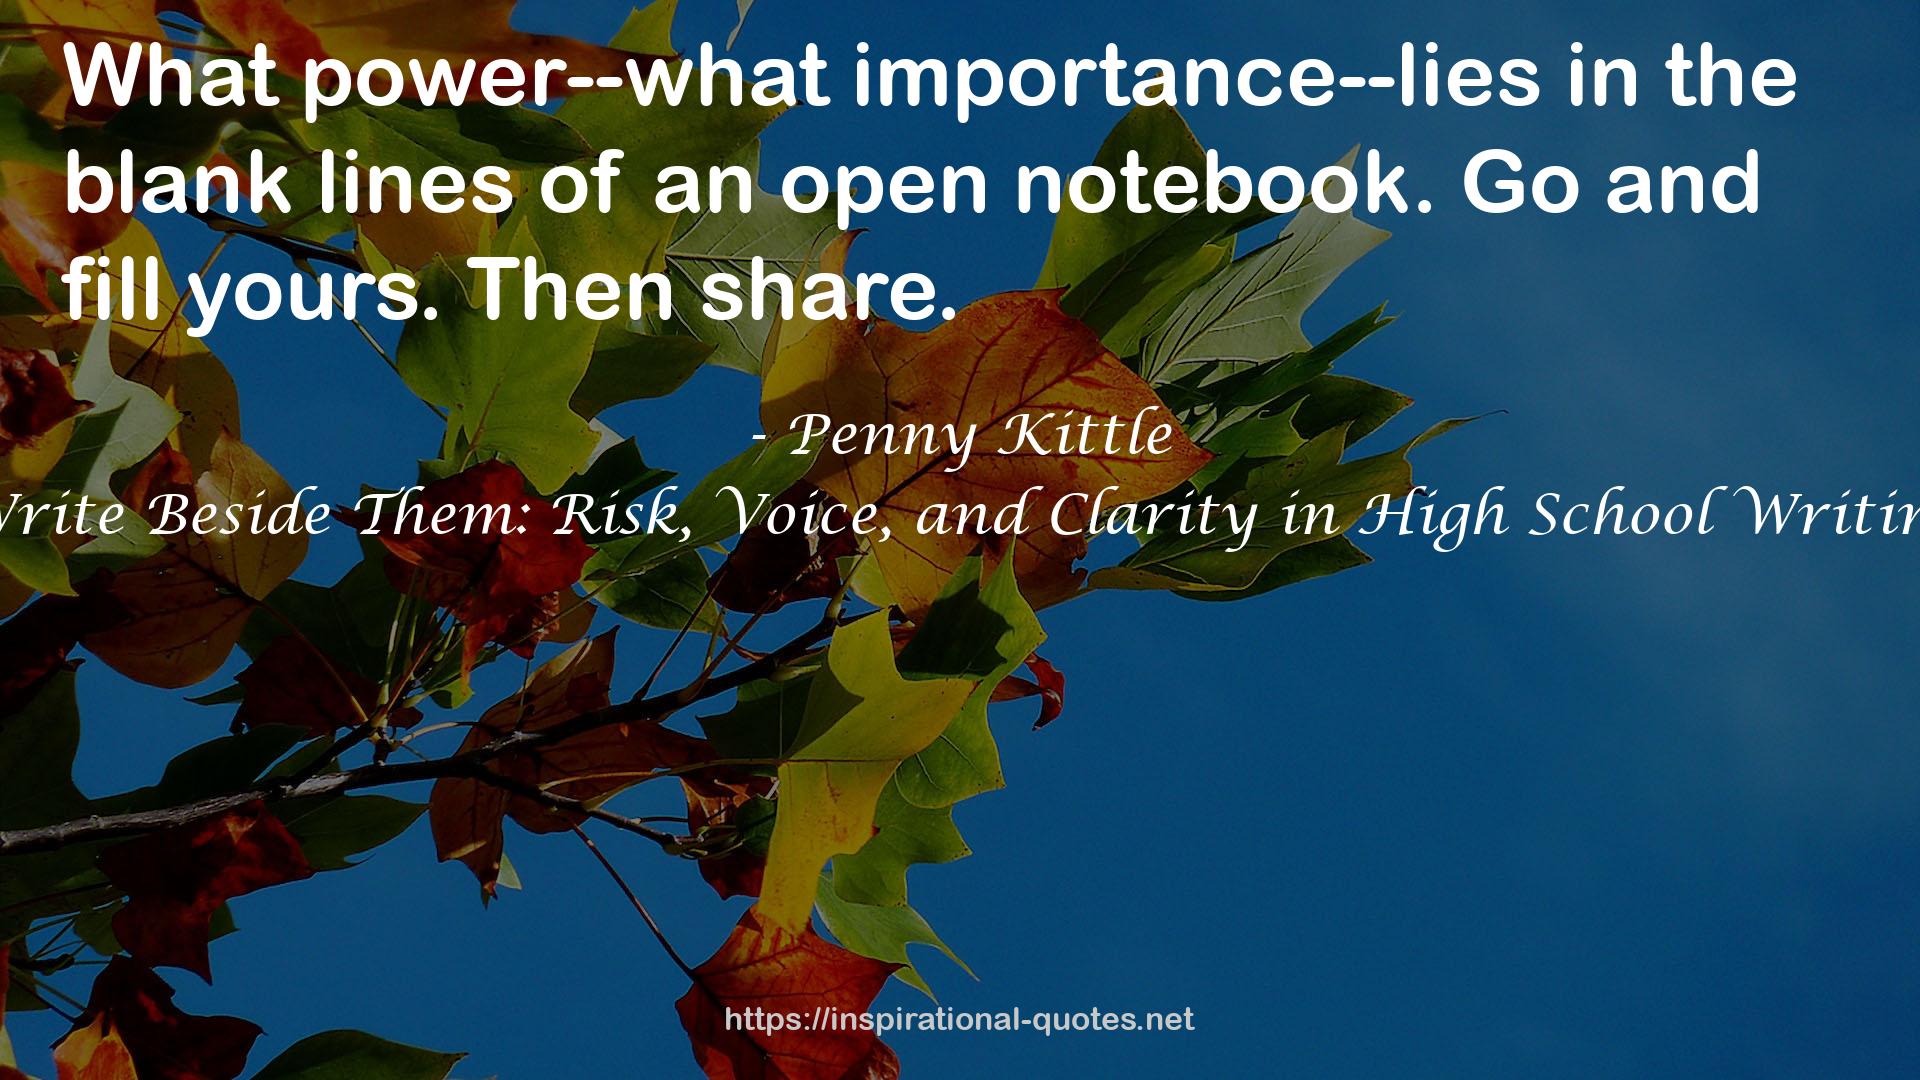 Write Beside Them: Risk, Voice, and Clarity in High School Writing QUOTES